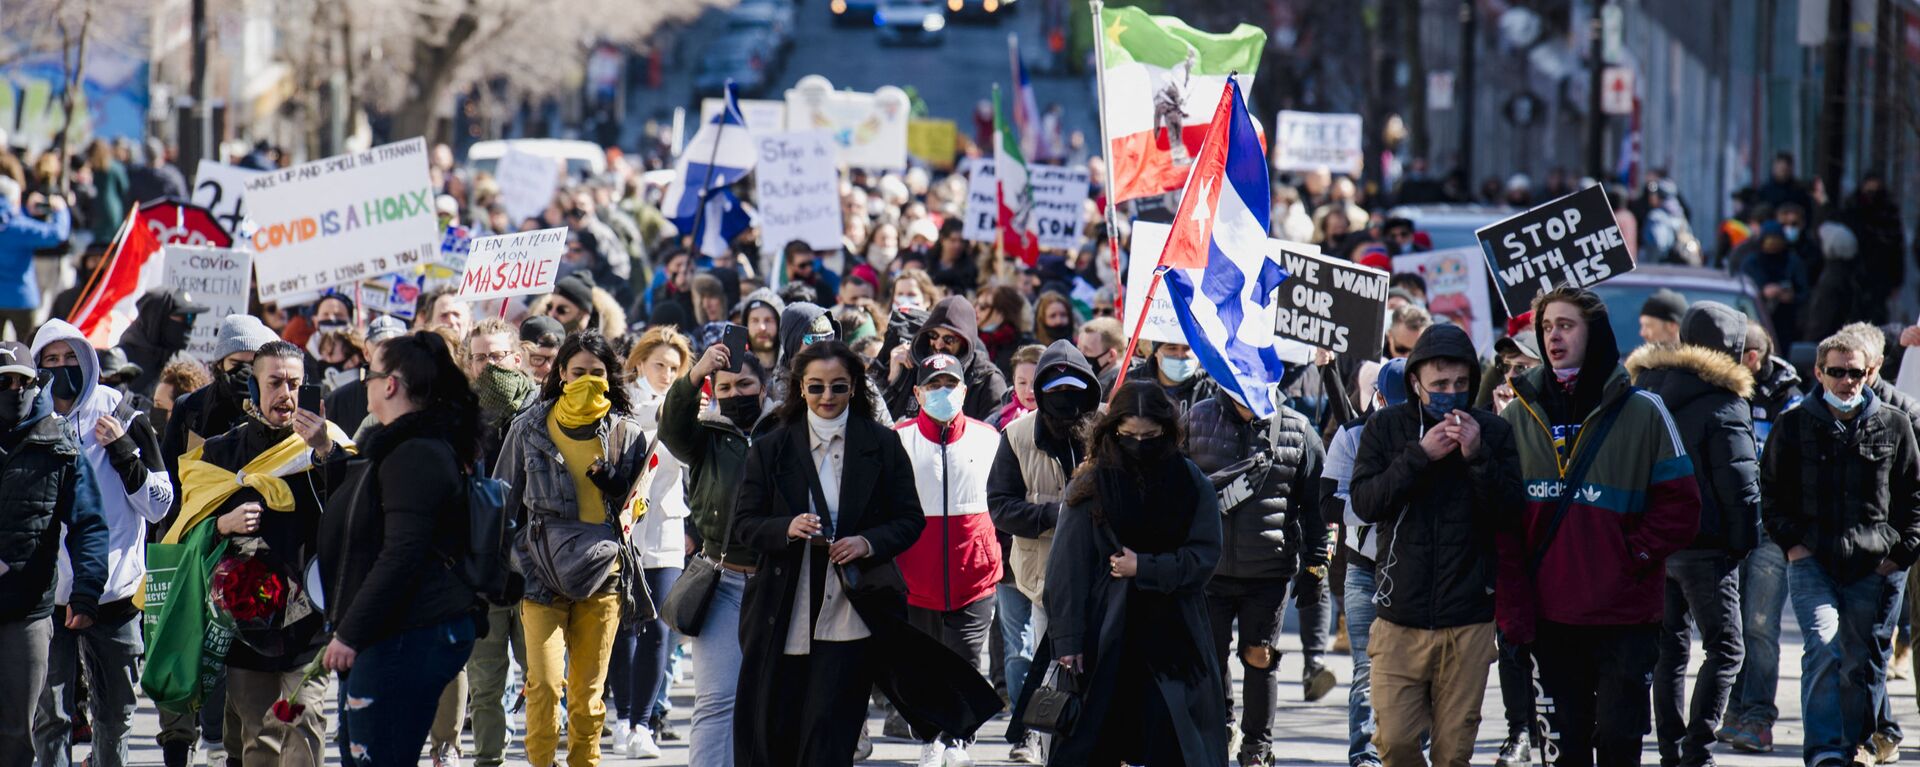 Thousands of people march in protest against Quebec’s Covid-19 lockdown measures in Montreal, Canada on March 20, 2021 - Sputnik International, 1920, 26.05.2021